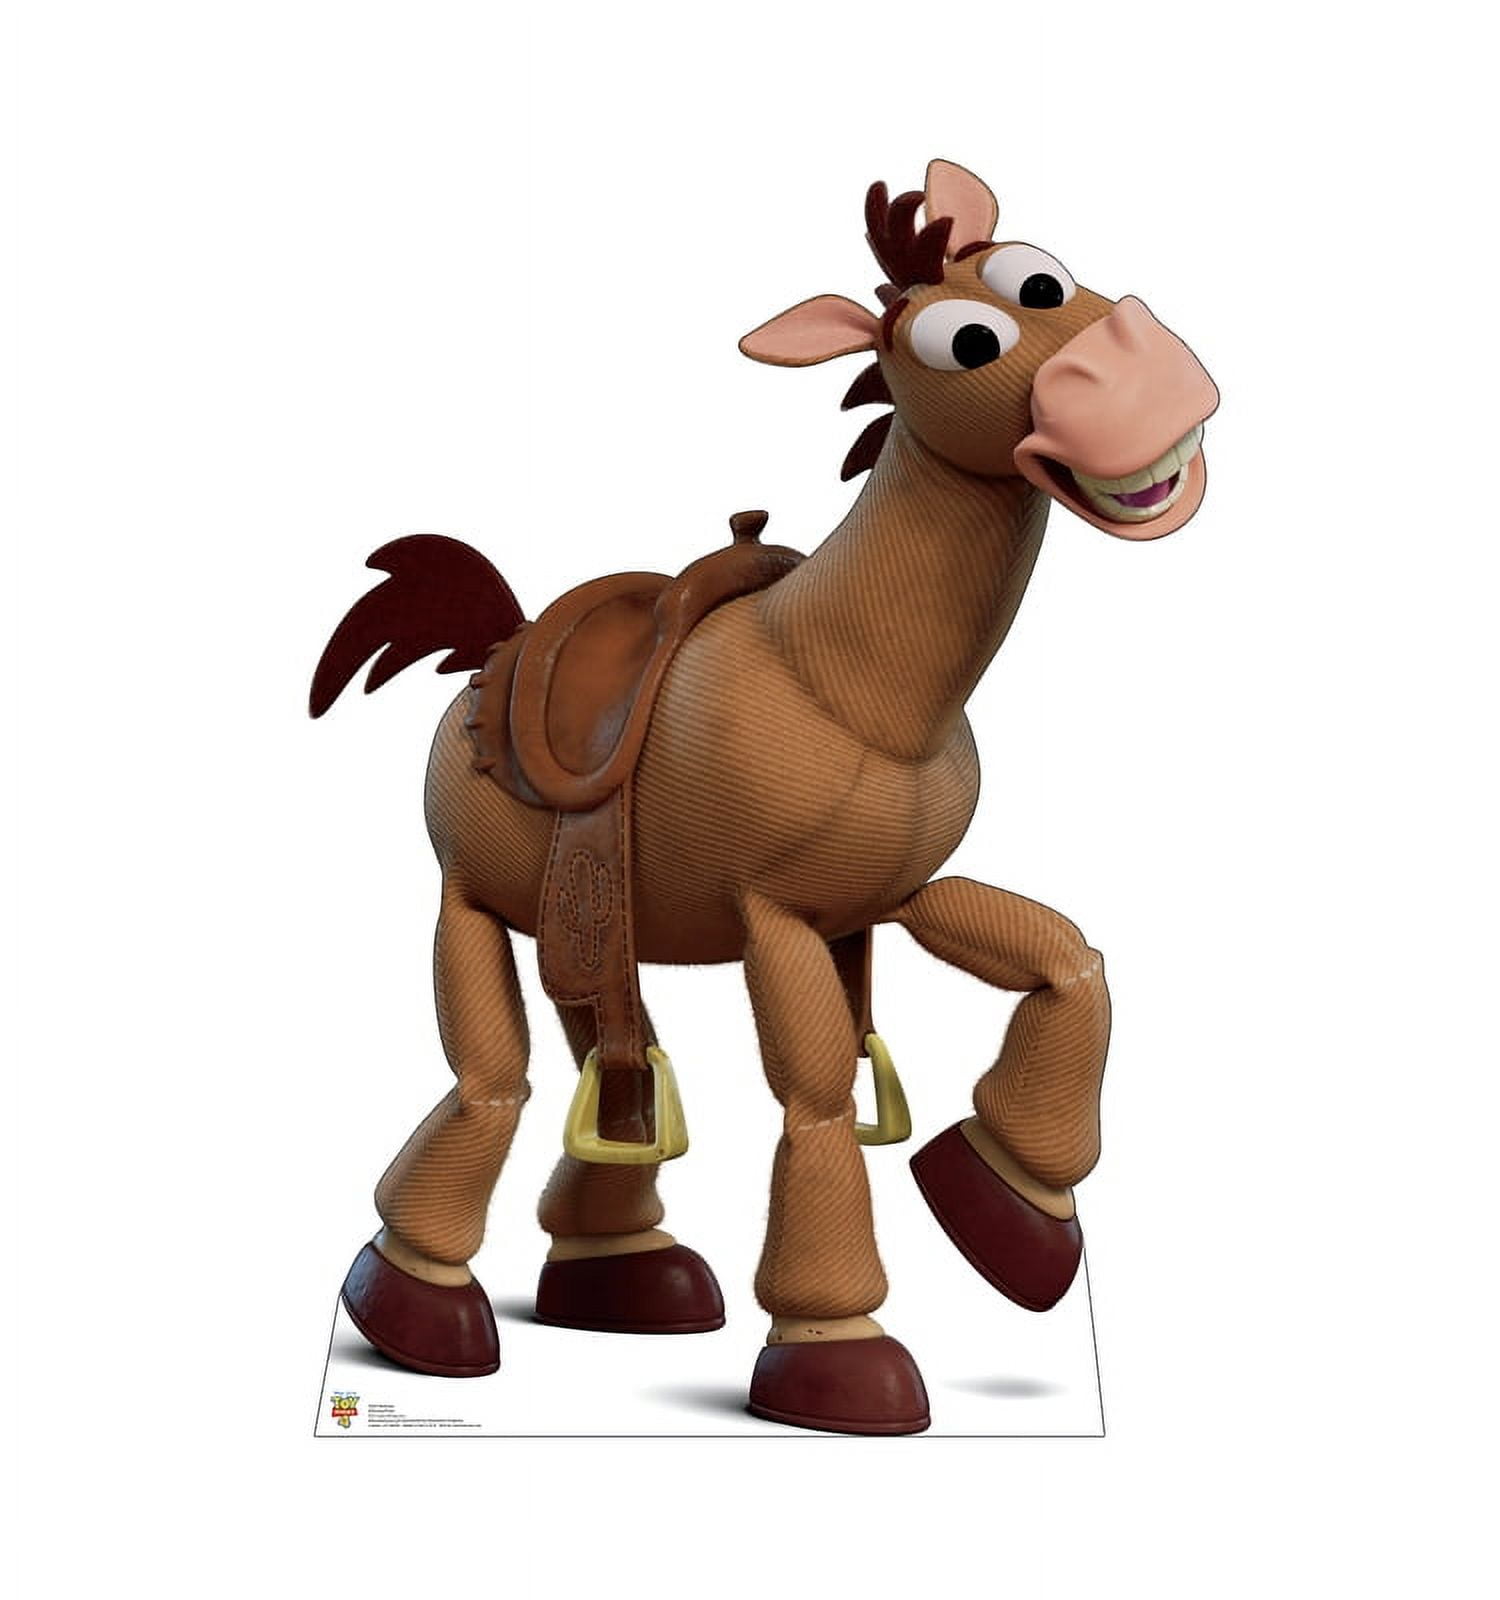 Picture of Advanced Graphics 2932 54 x 38 in. Bullseye Disney & Pixar Toy Story 4 Cardboard Cutout Standup